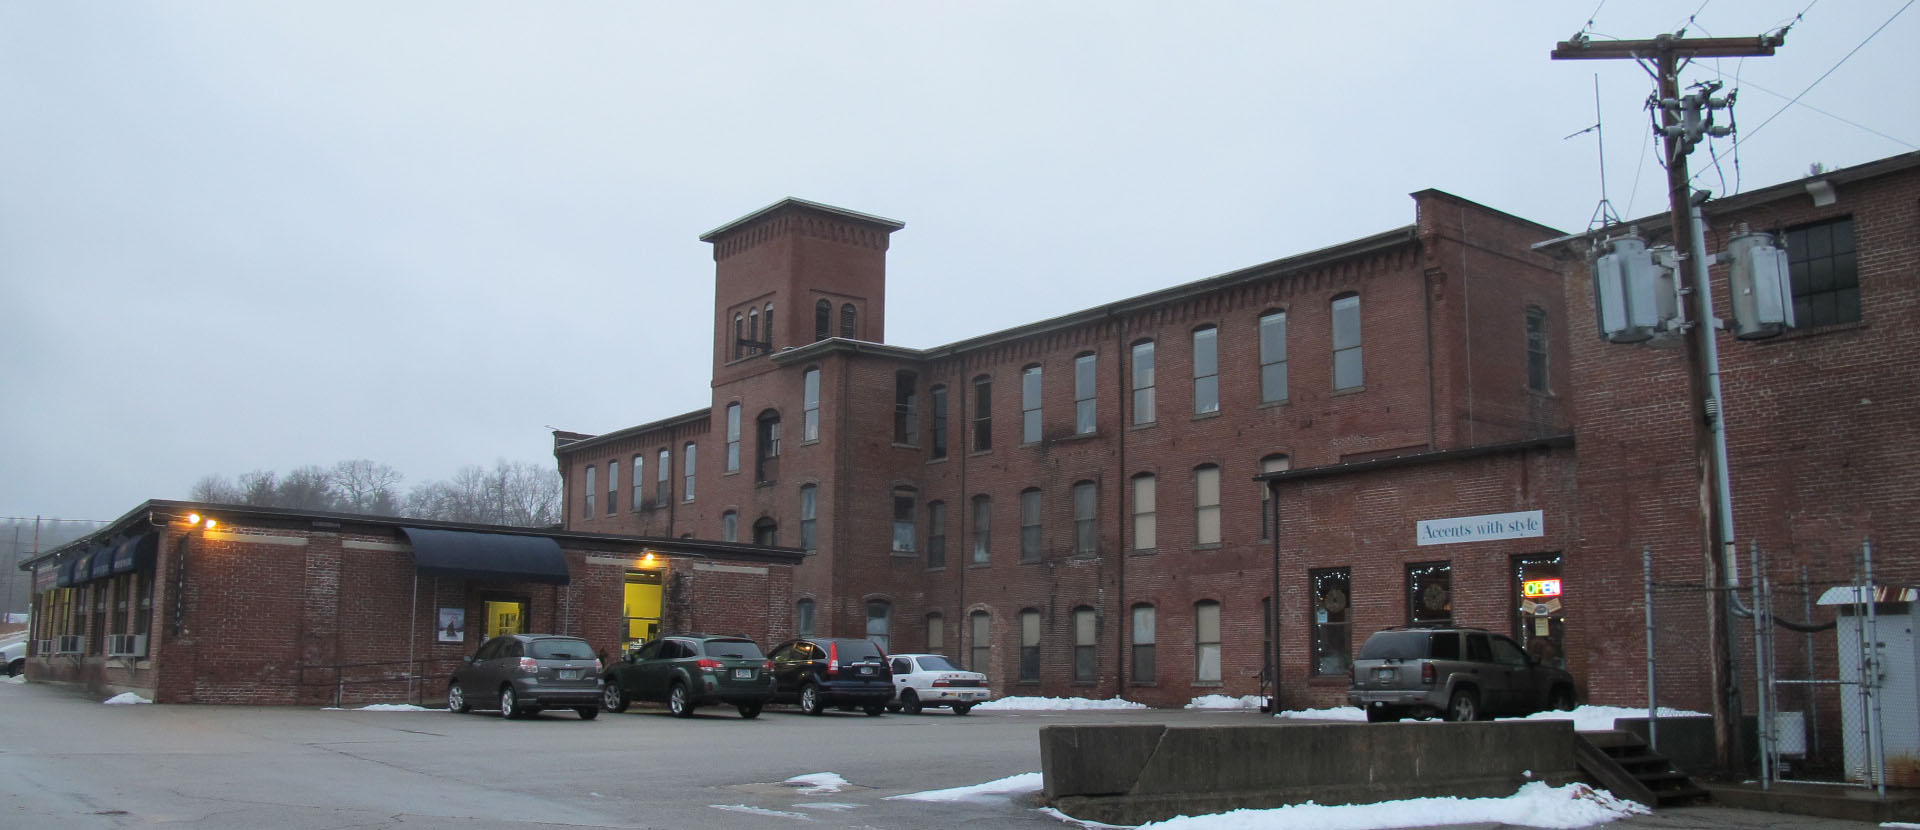 Developer Sees Affordable Housing Opportunity In Old Mill ...